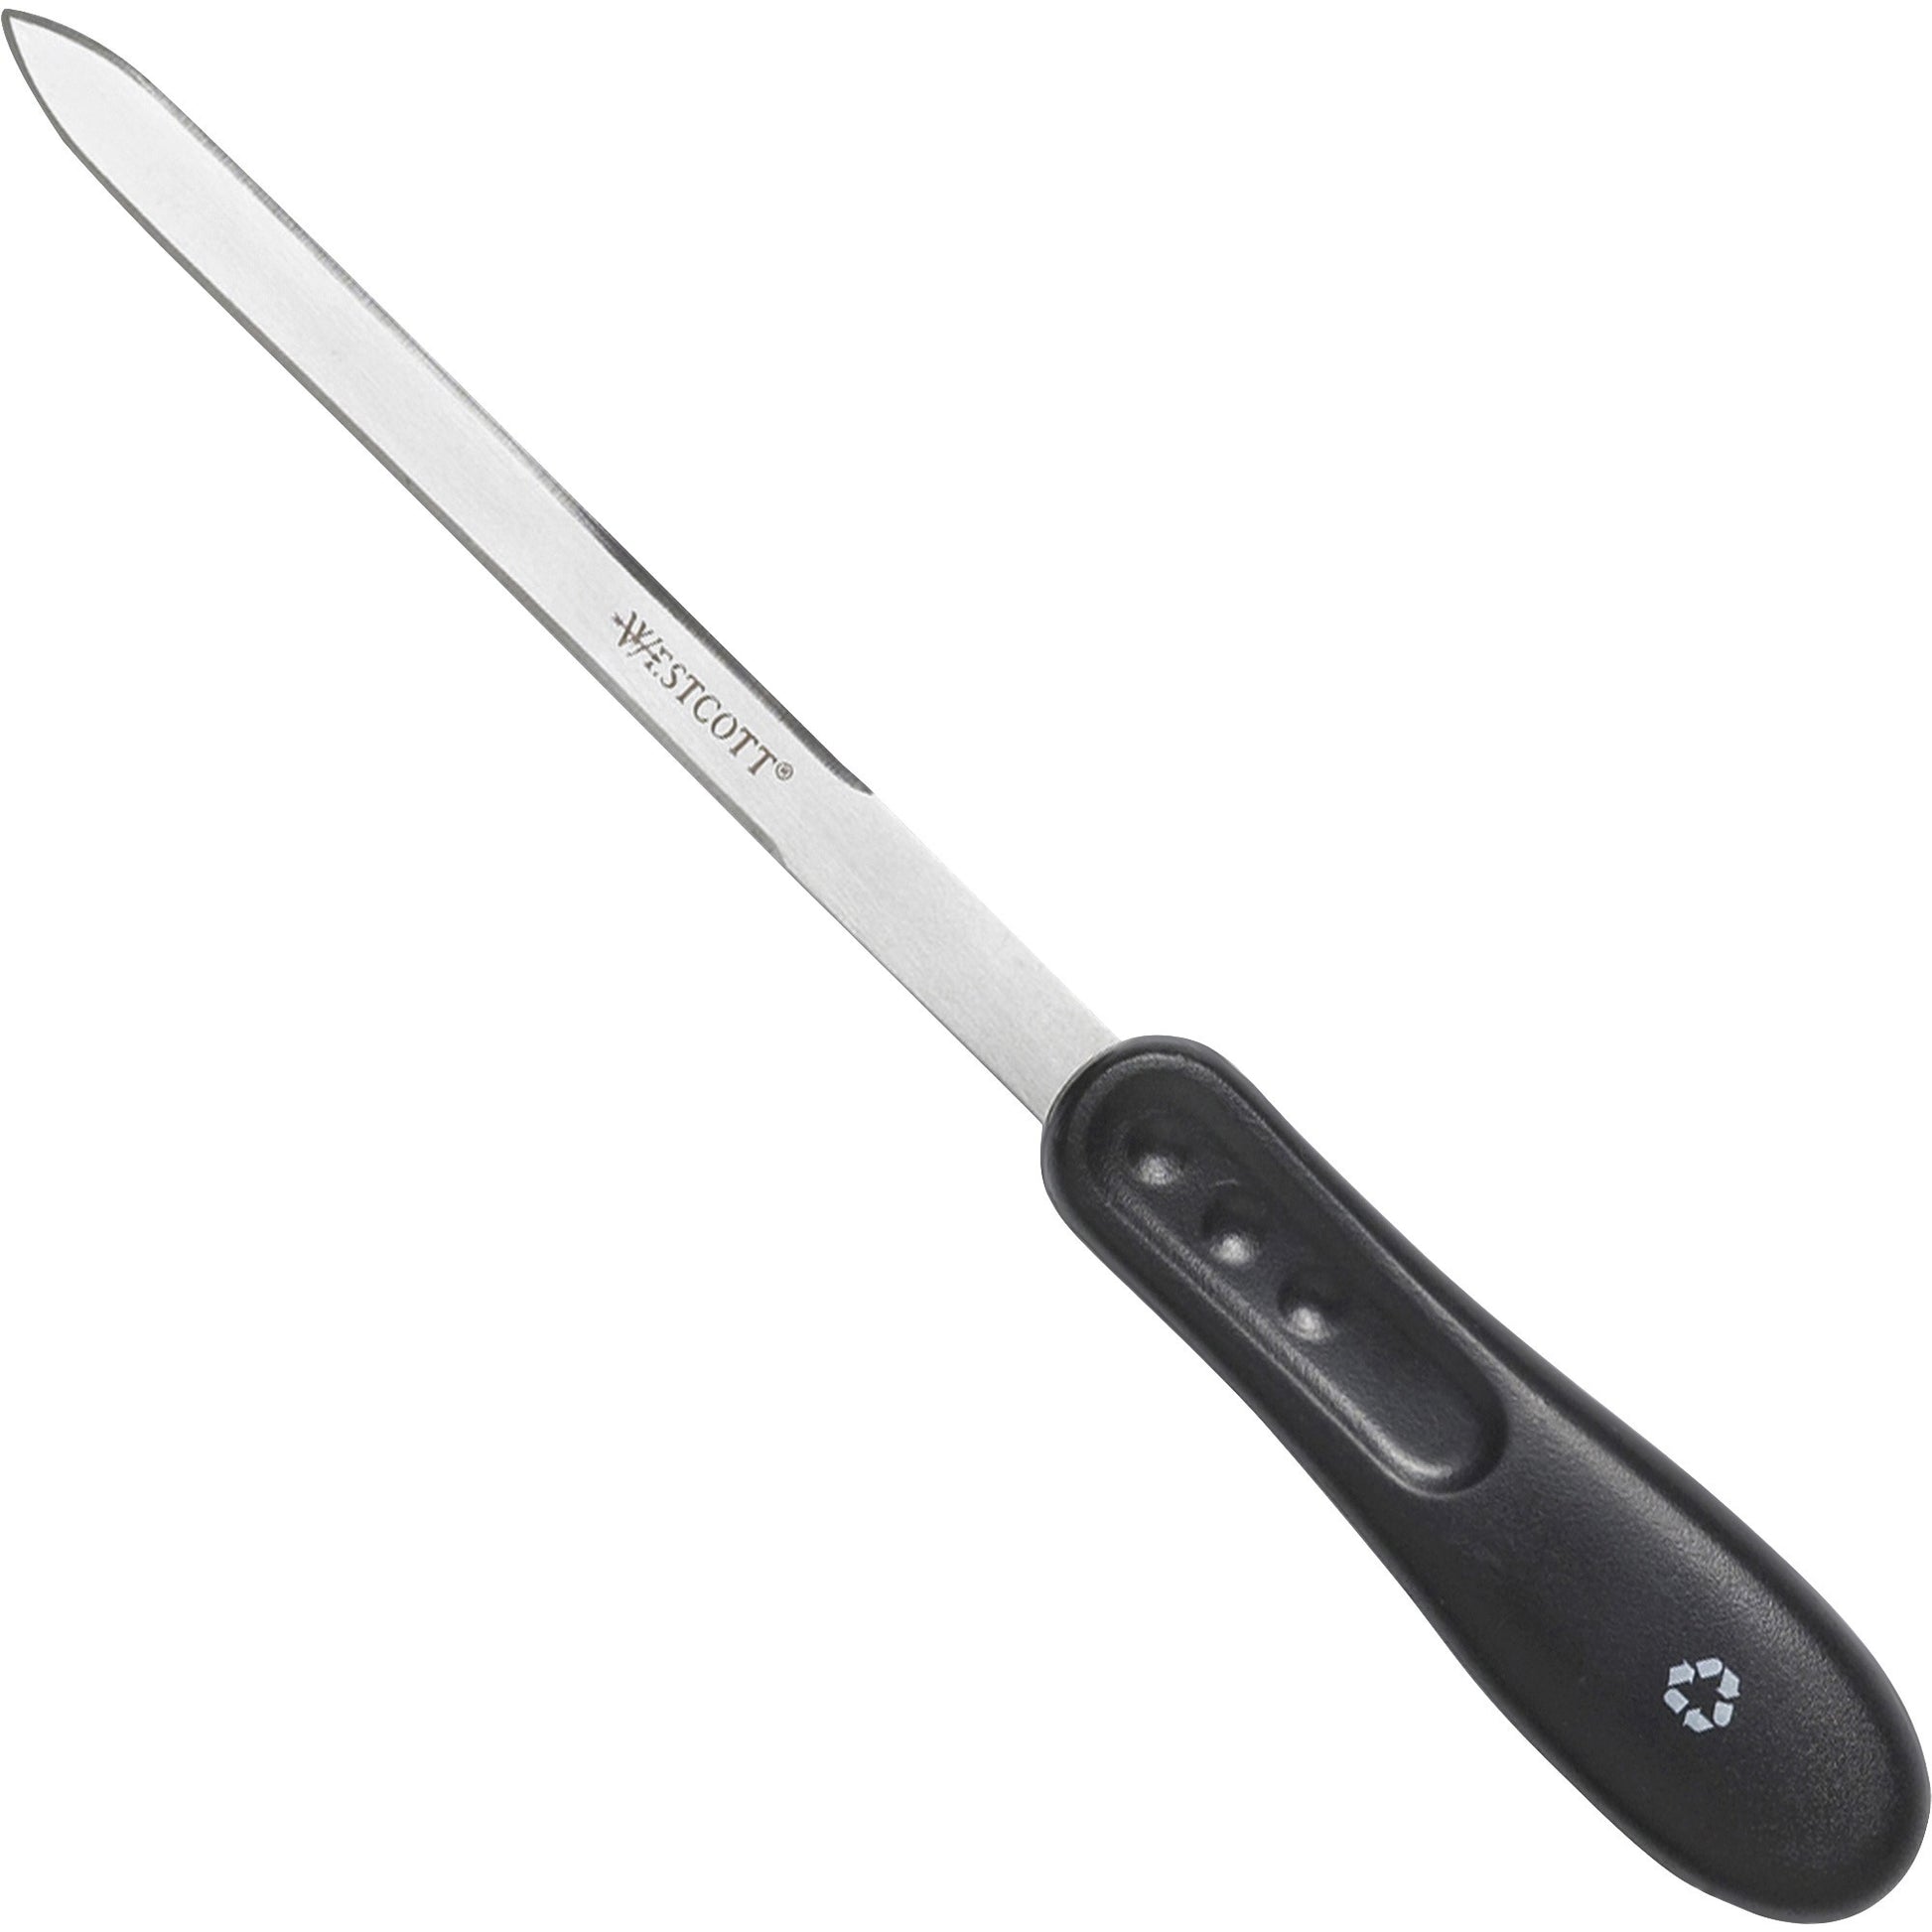 Acme United Kleen-Earth Antimicrobial Letter Opener